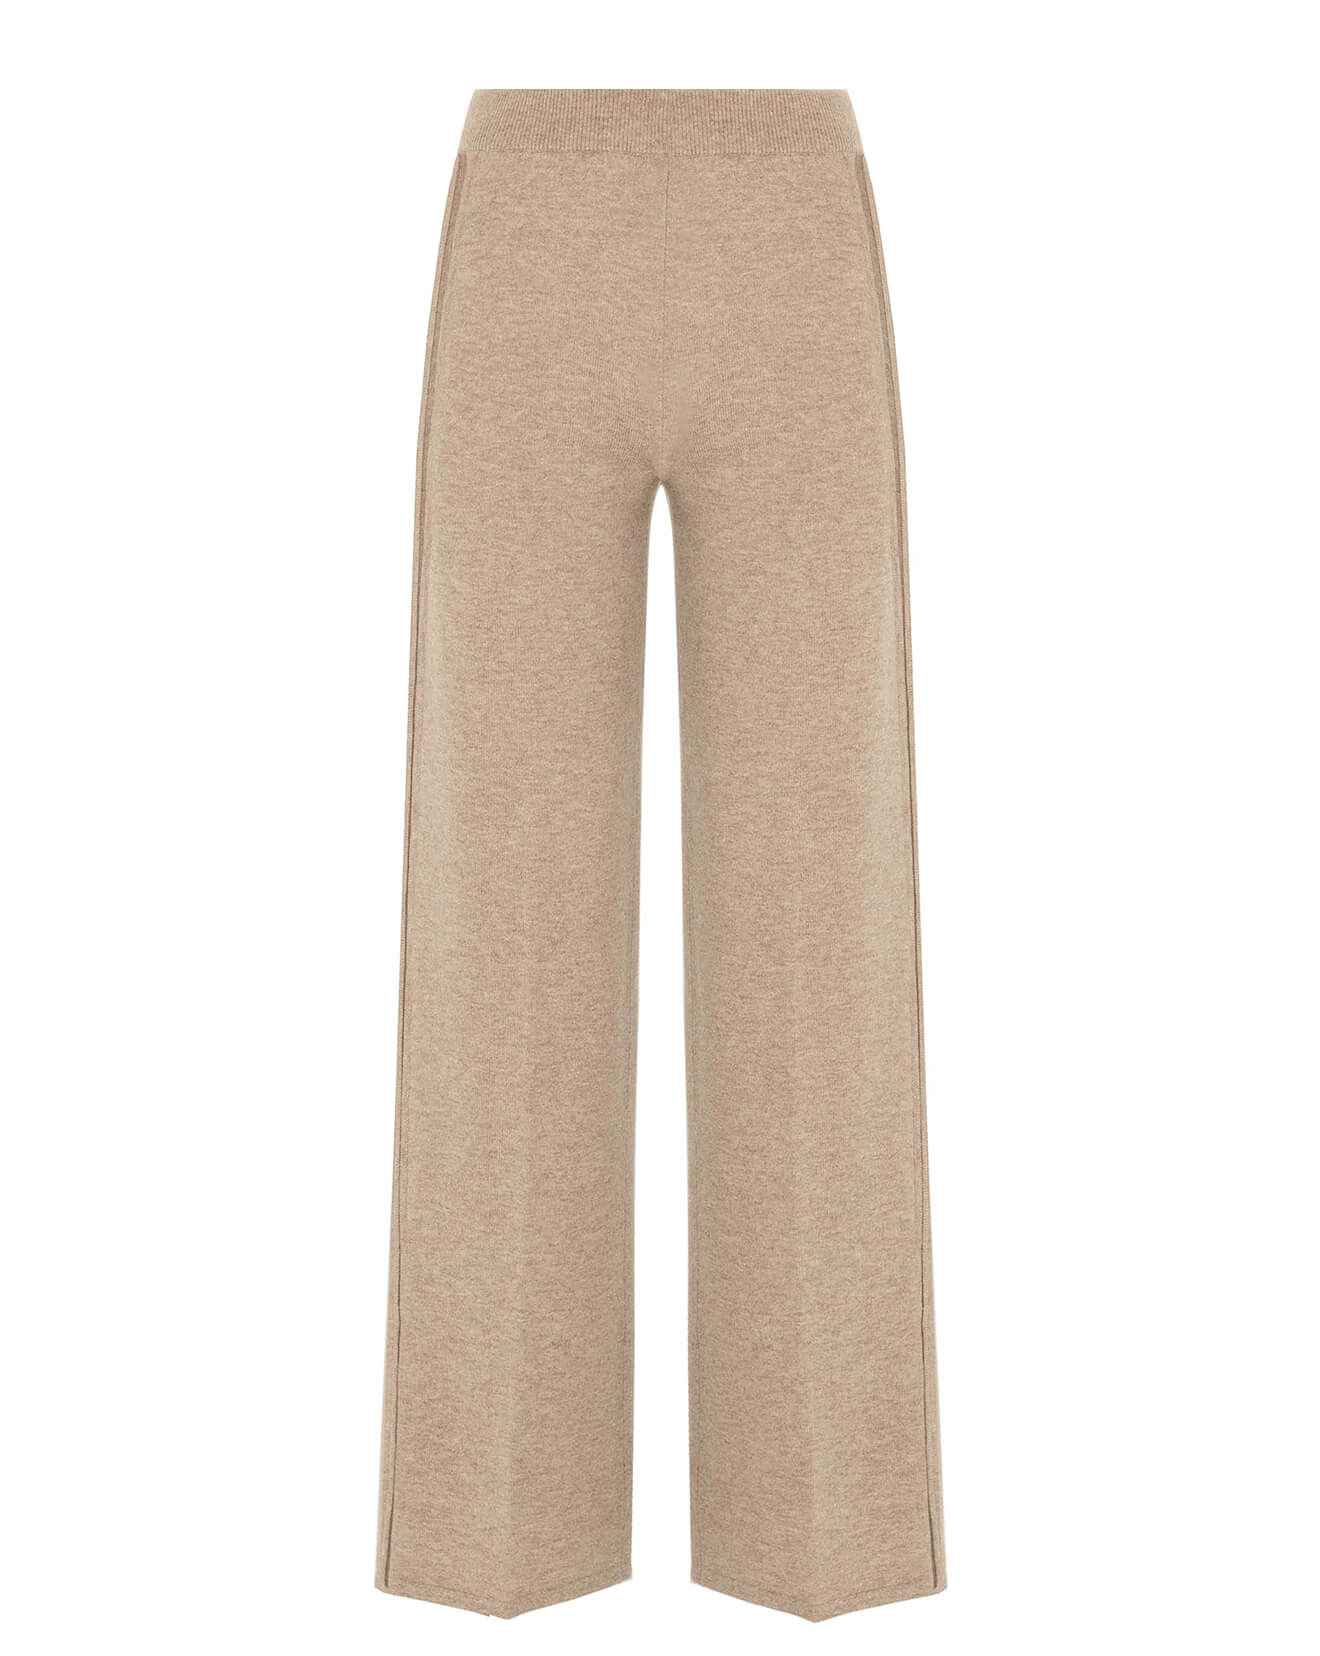 blended cashmere trousers